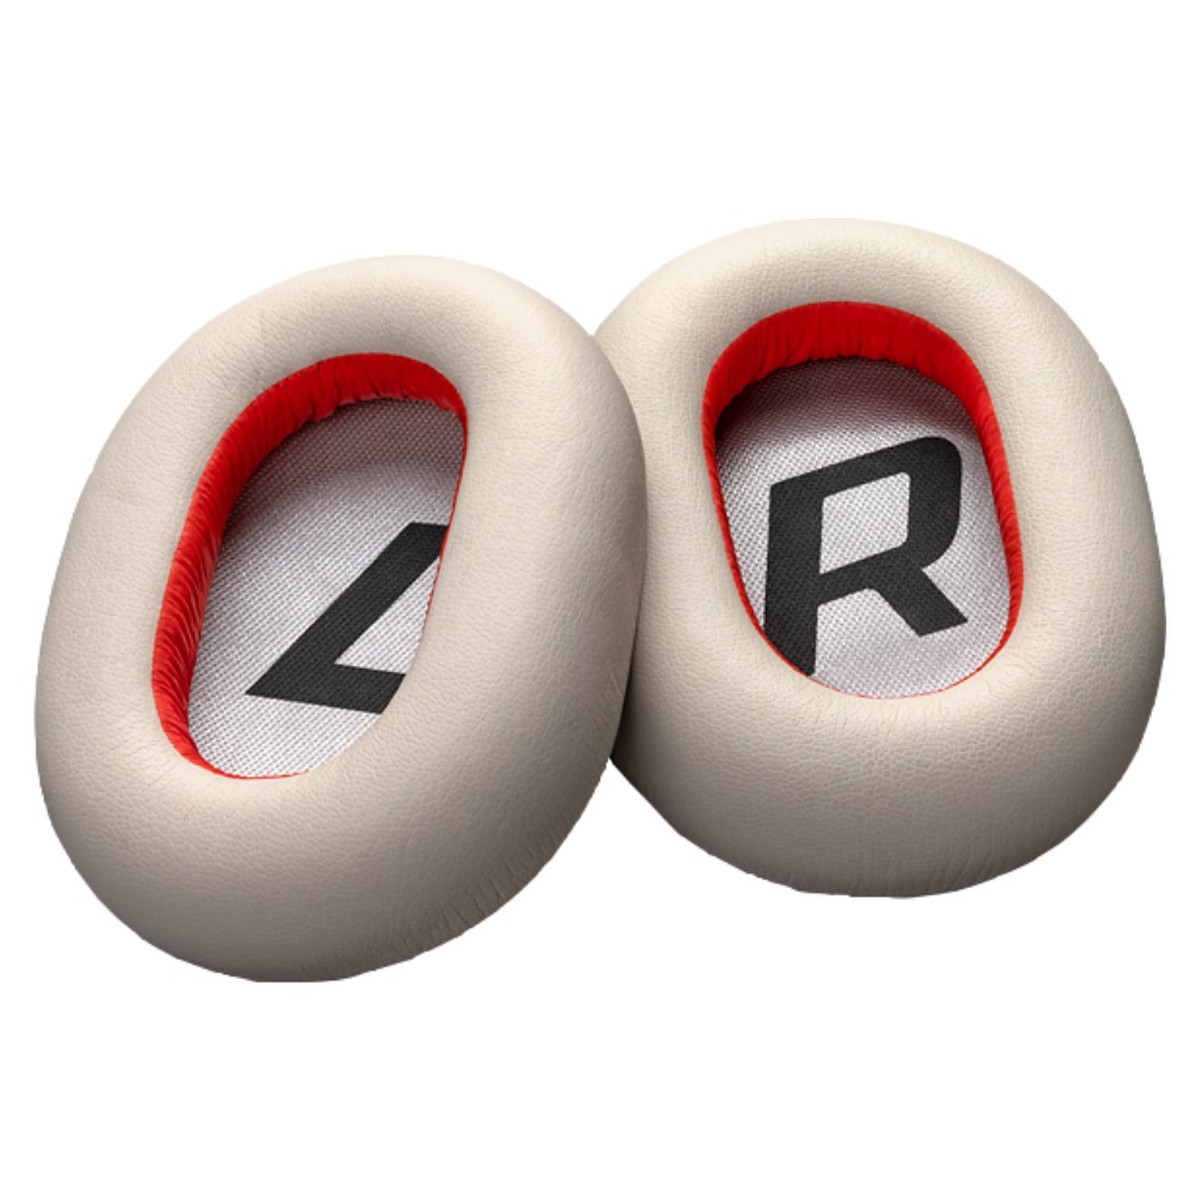 poly voyager 8200 leather ear cushions, ivory (beige) icon view